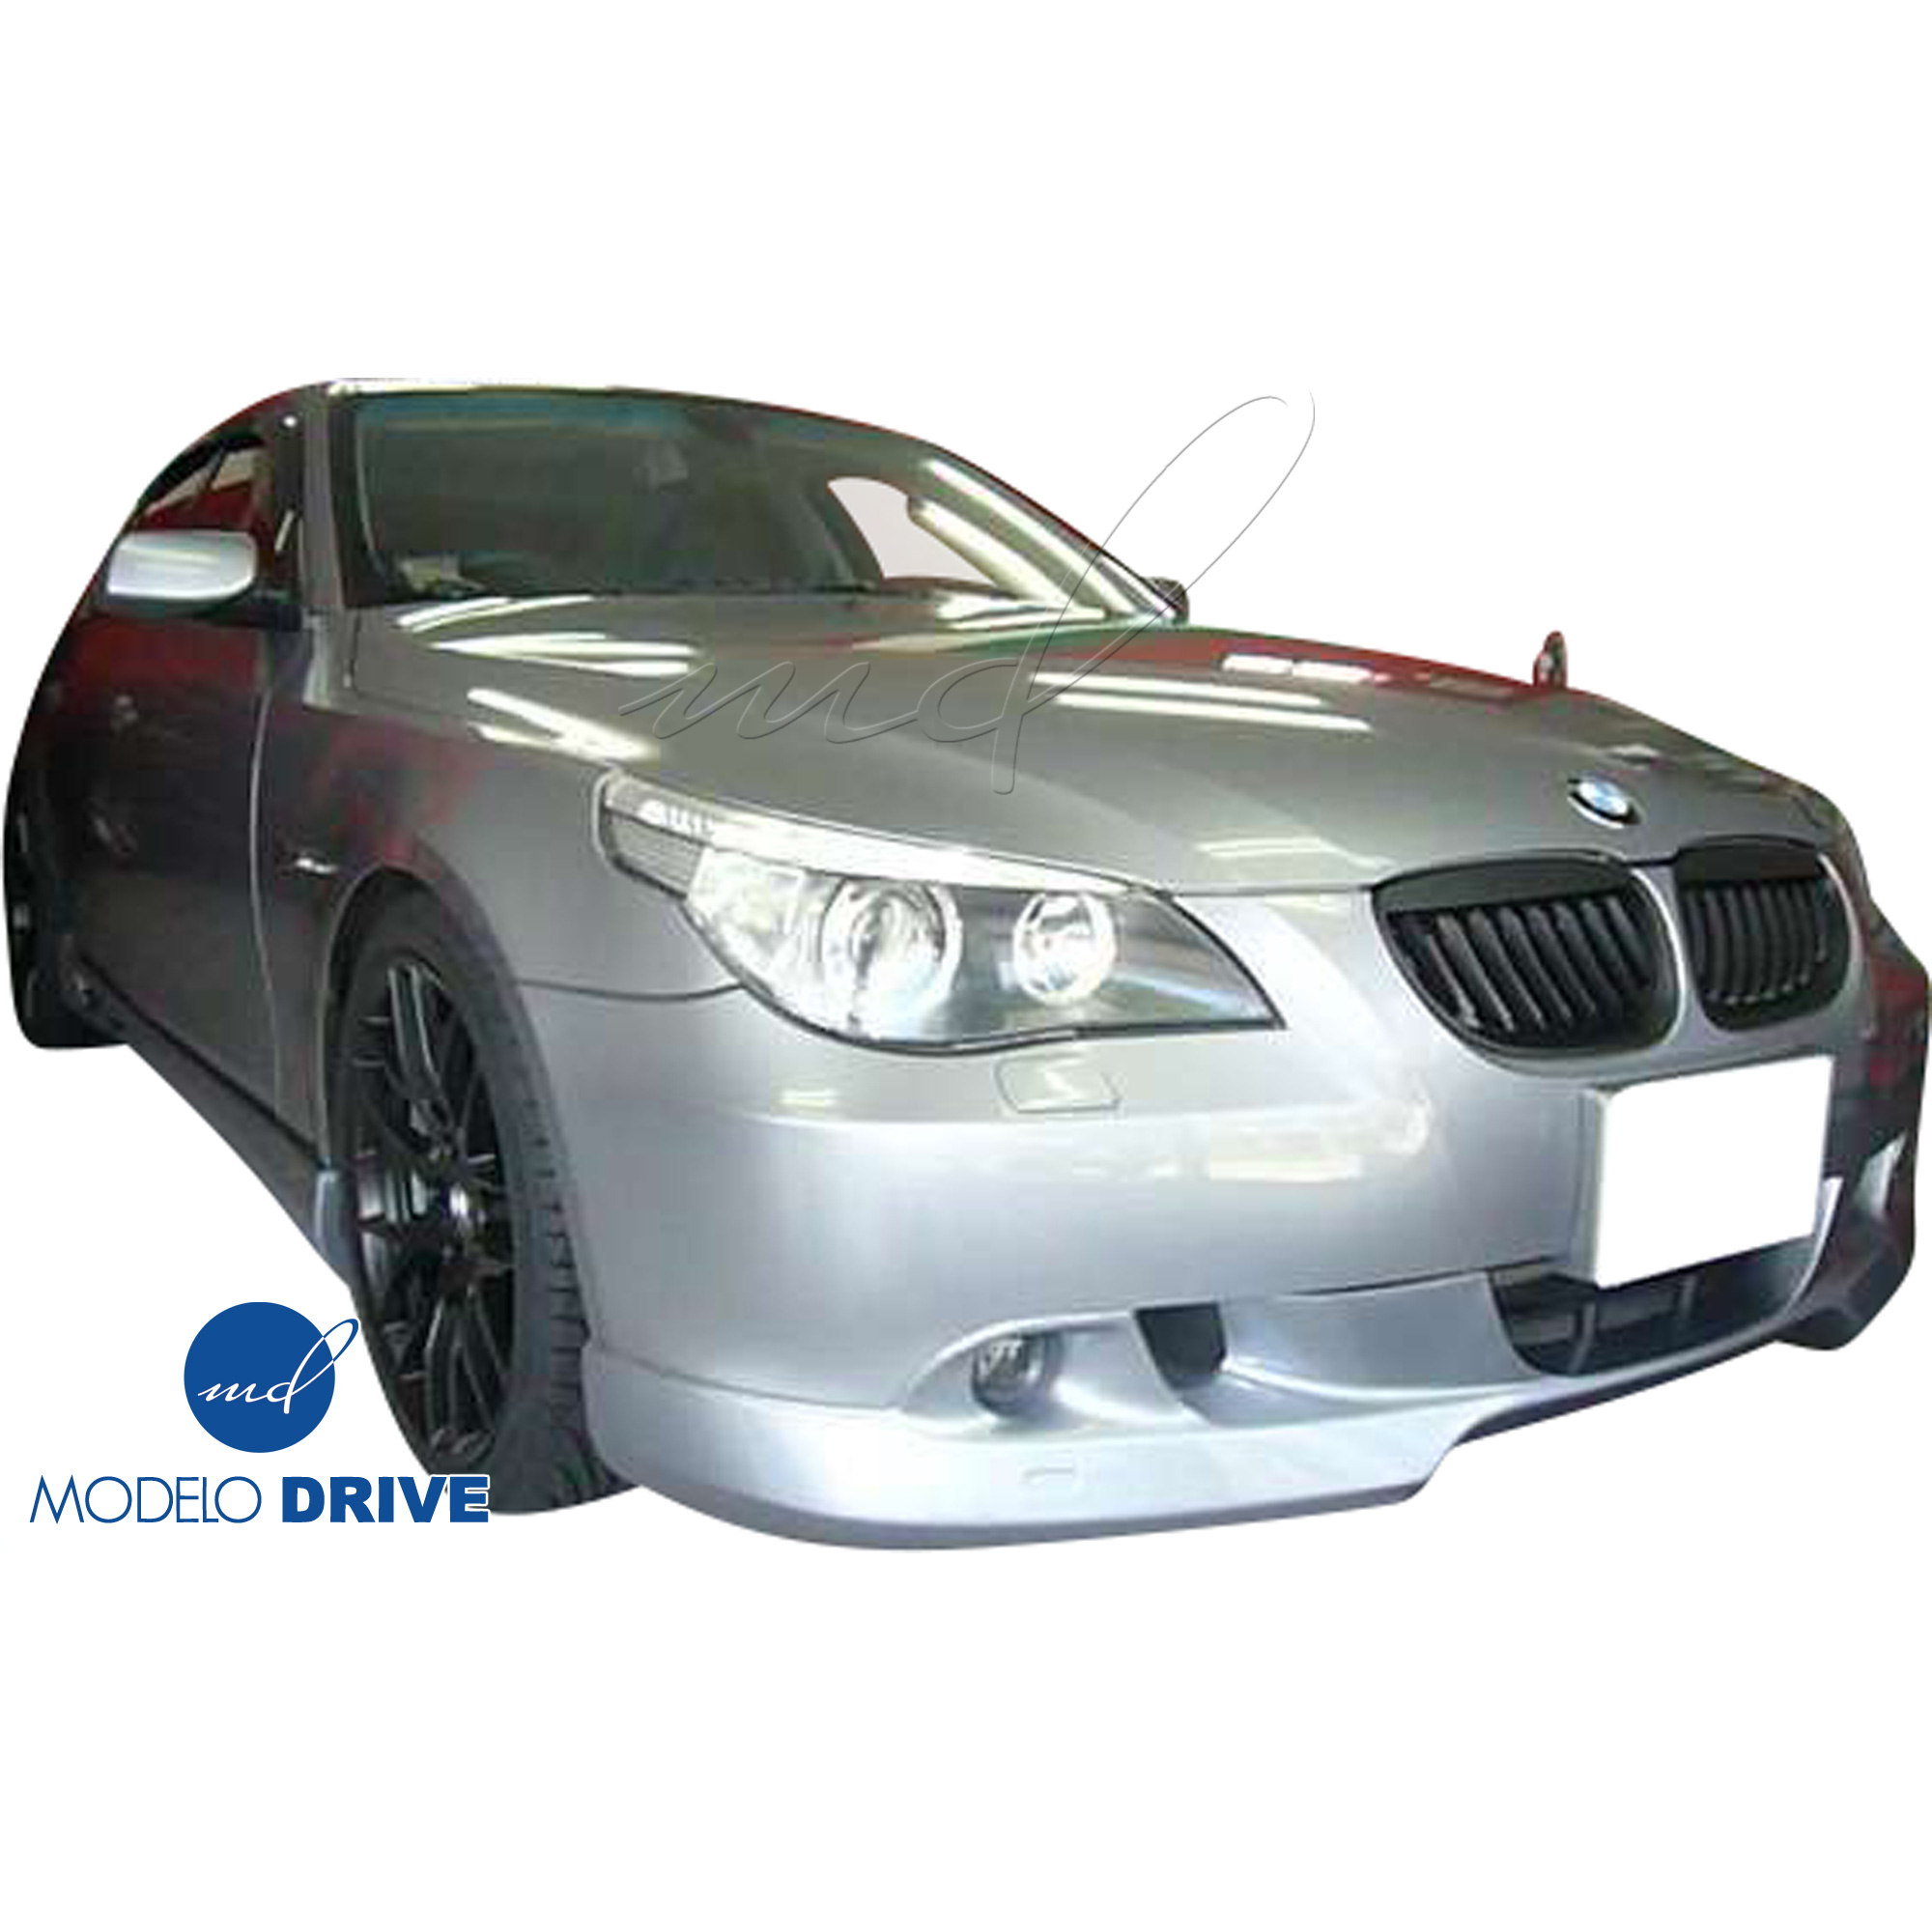 ModeloDrive FRP ASCH Front Valance Add-on > BMW 5-Series E60 2004-2010 > 4dr - Image 3